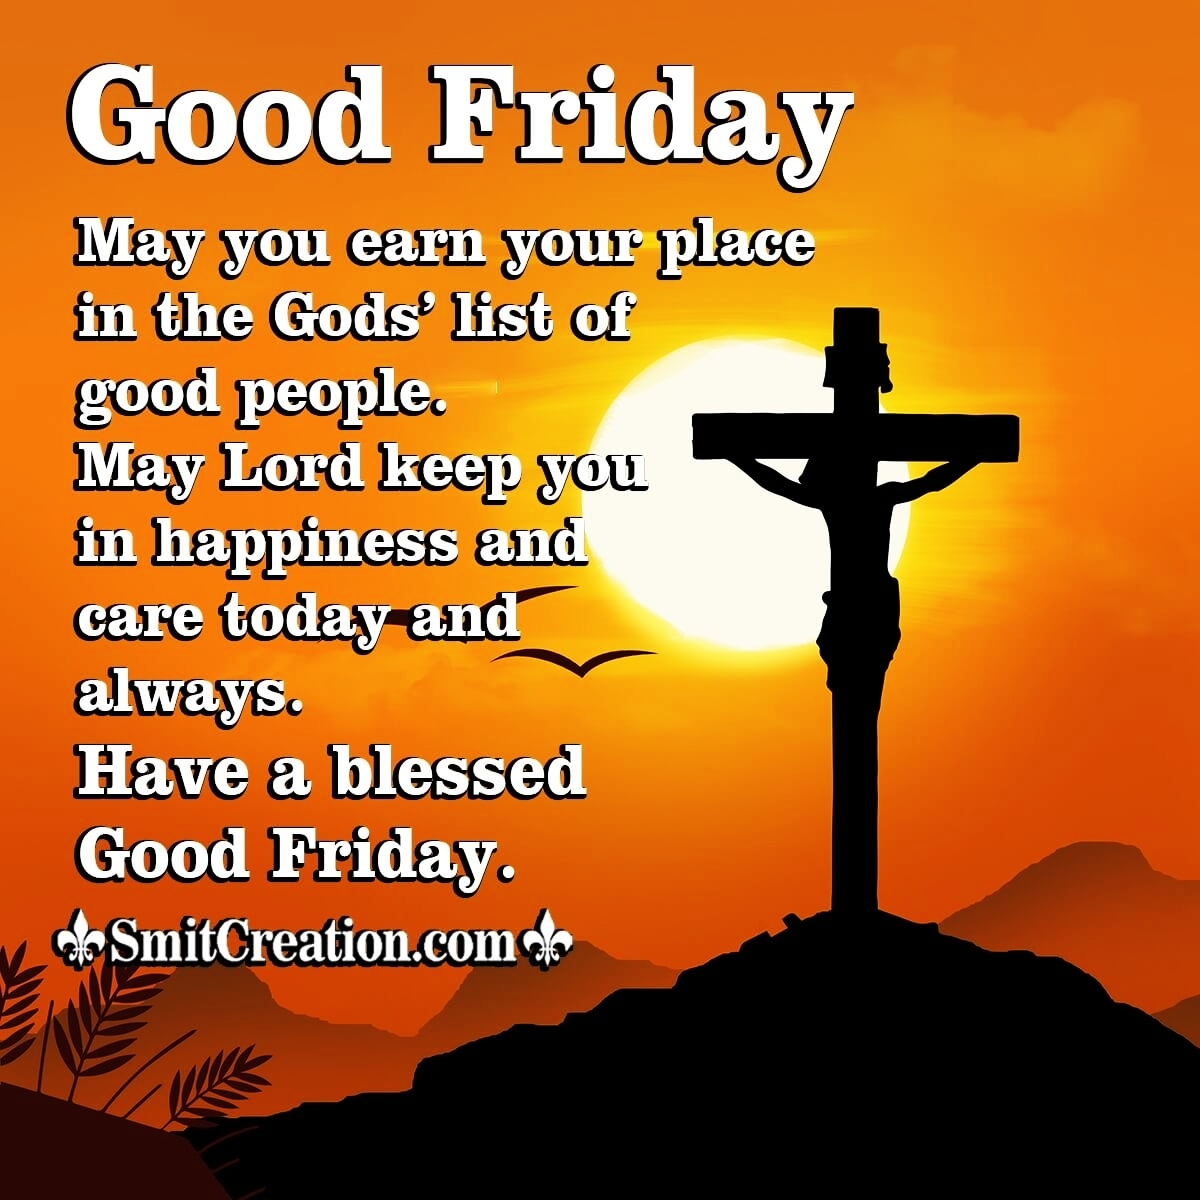 Good Friday Wishes to Share with Your Loved Ones